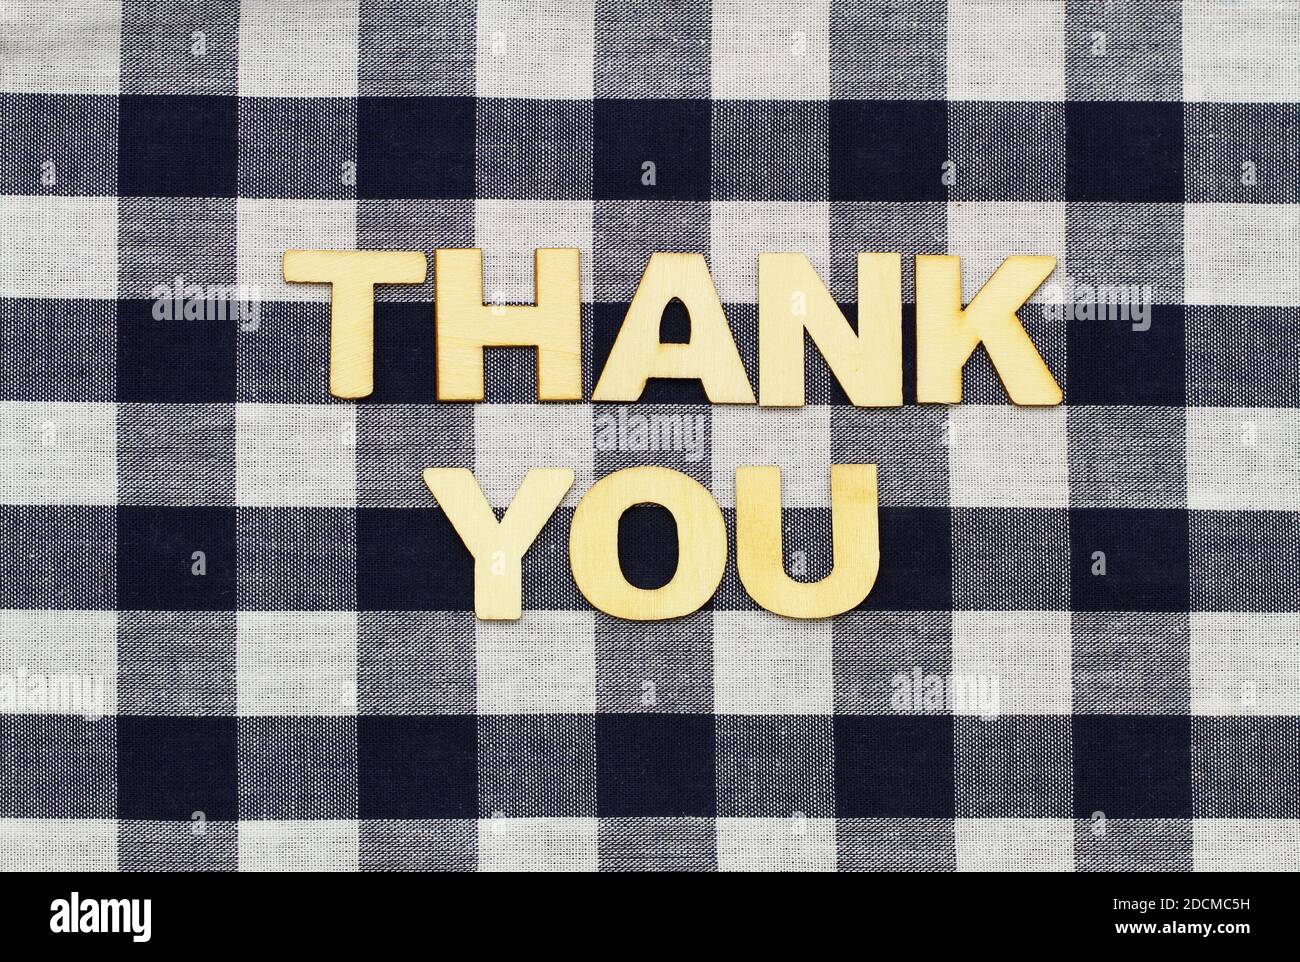 Thank you written on checkered surface Stock Photo